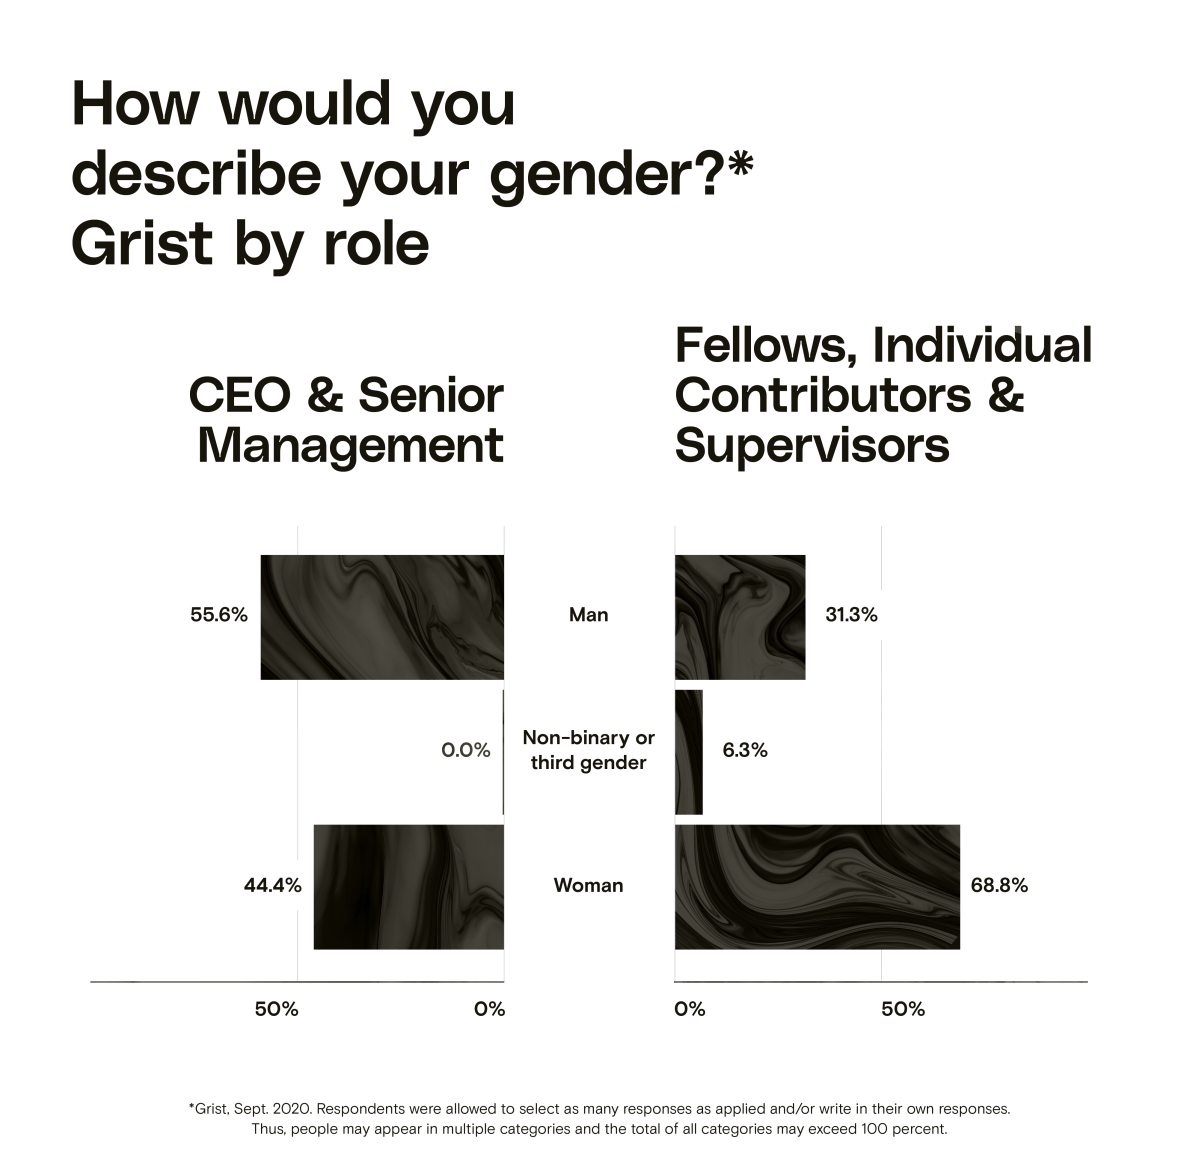 A bar chart showing gender at Grist by role. In the CEO & Senior Management category, 55.6% of respondents identified as men, and 44.4% of respondents identified as women. In the Fellows, Individual Contributors & Supervisors category, 31.3% identified as men, 6.3% identified as non-binary or third gender, and 68.8% identified as women.